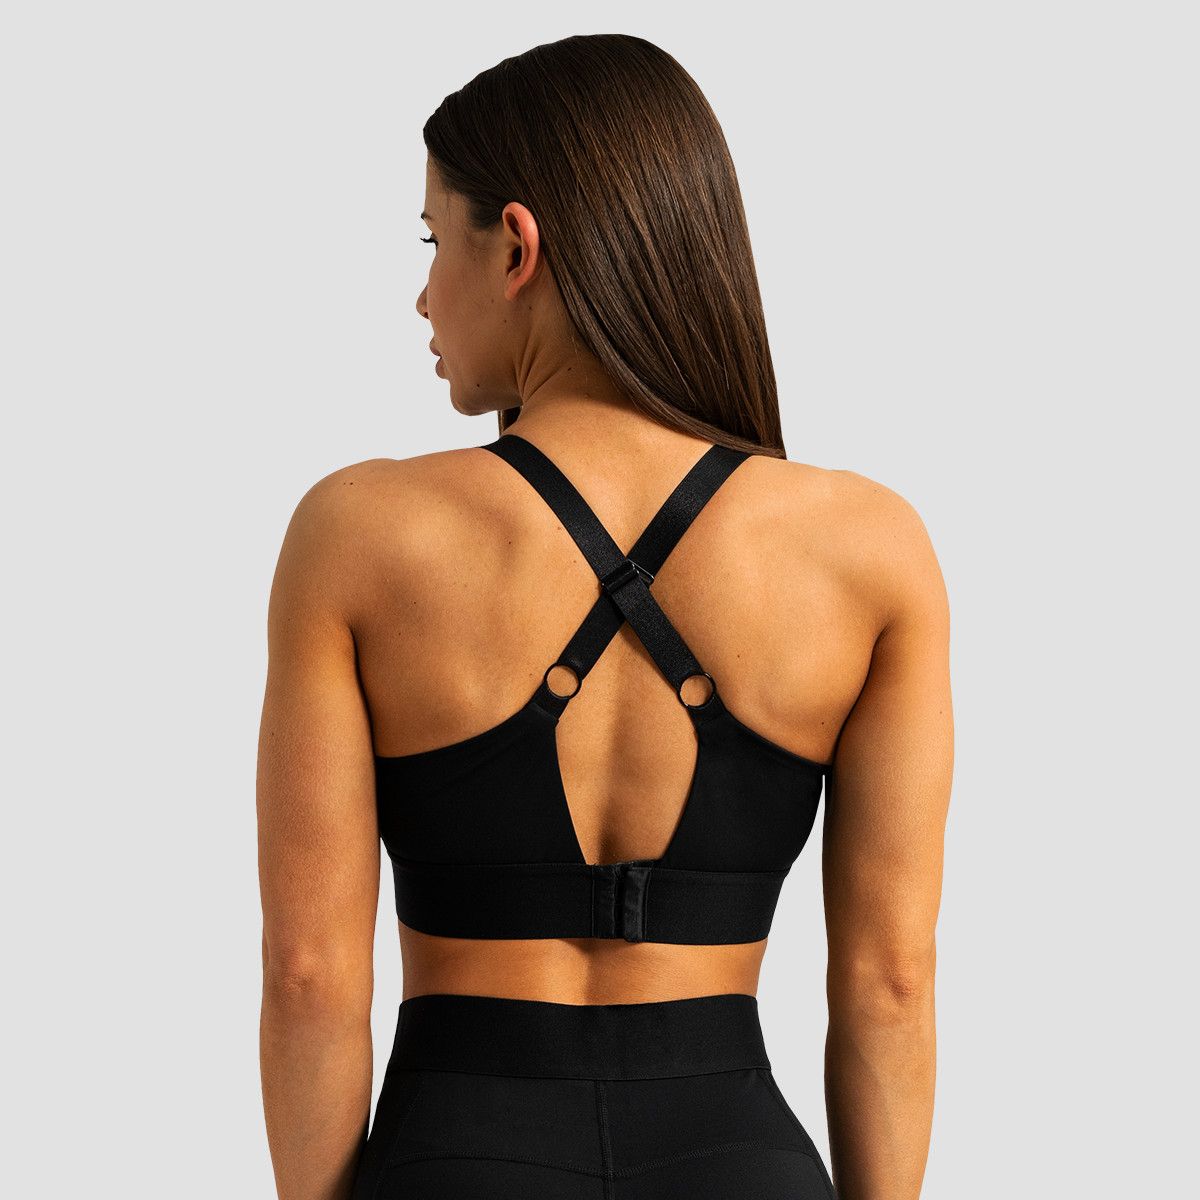 Limitless Adjustable Sports Bra - Black – STRONGER THAN YOUR LAST